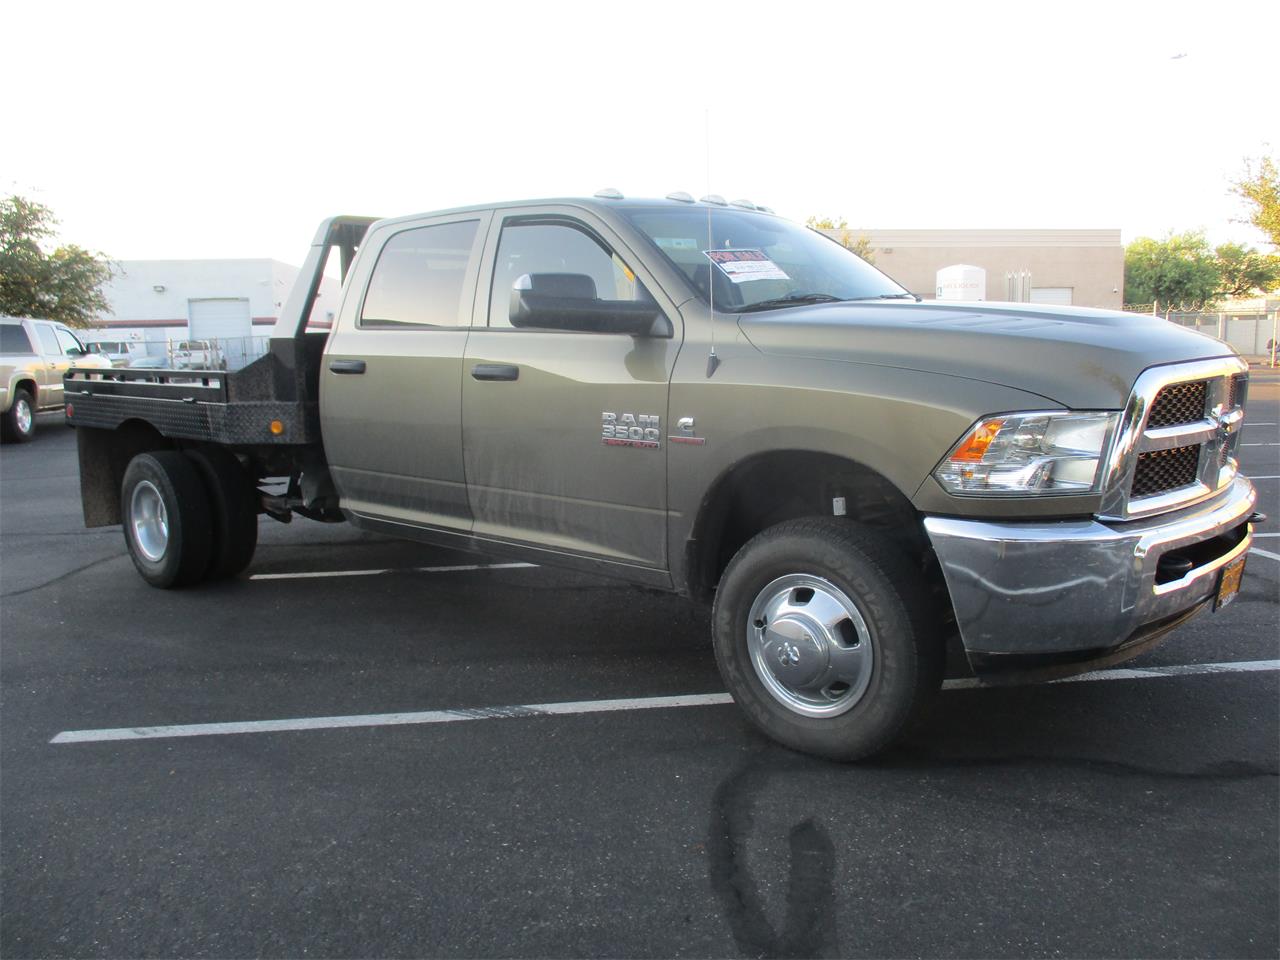 2015 Dodge RAM 3500 Crew Cab Dually for Sale | ClassicCars ...